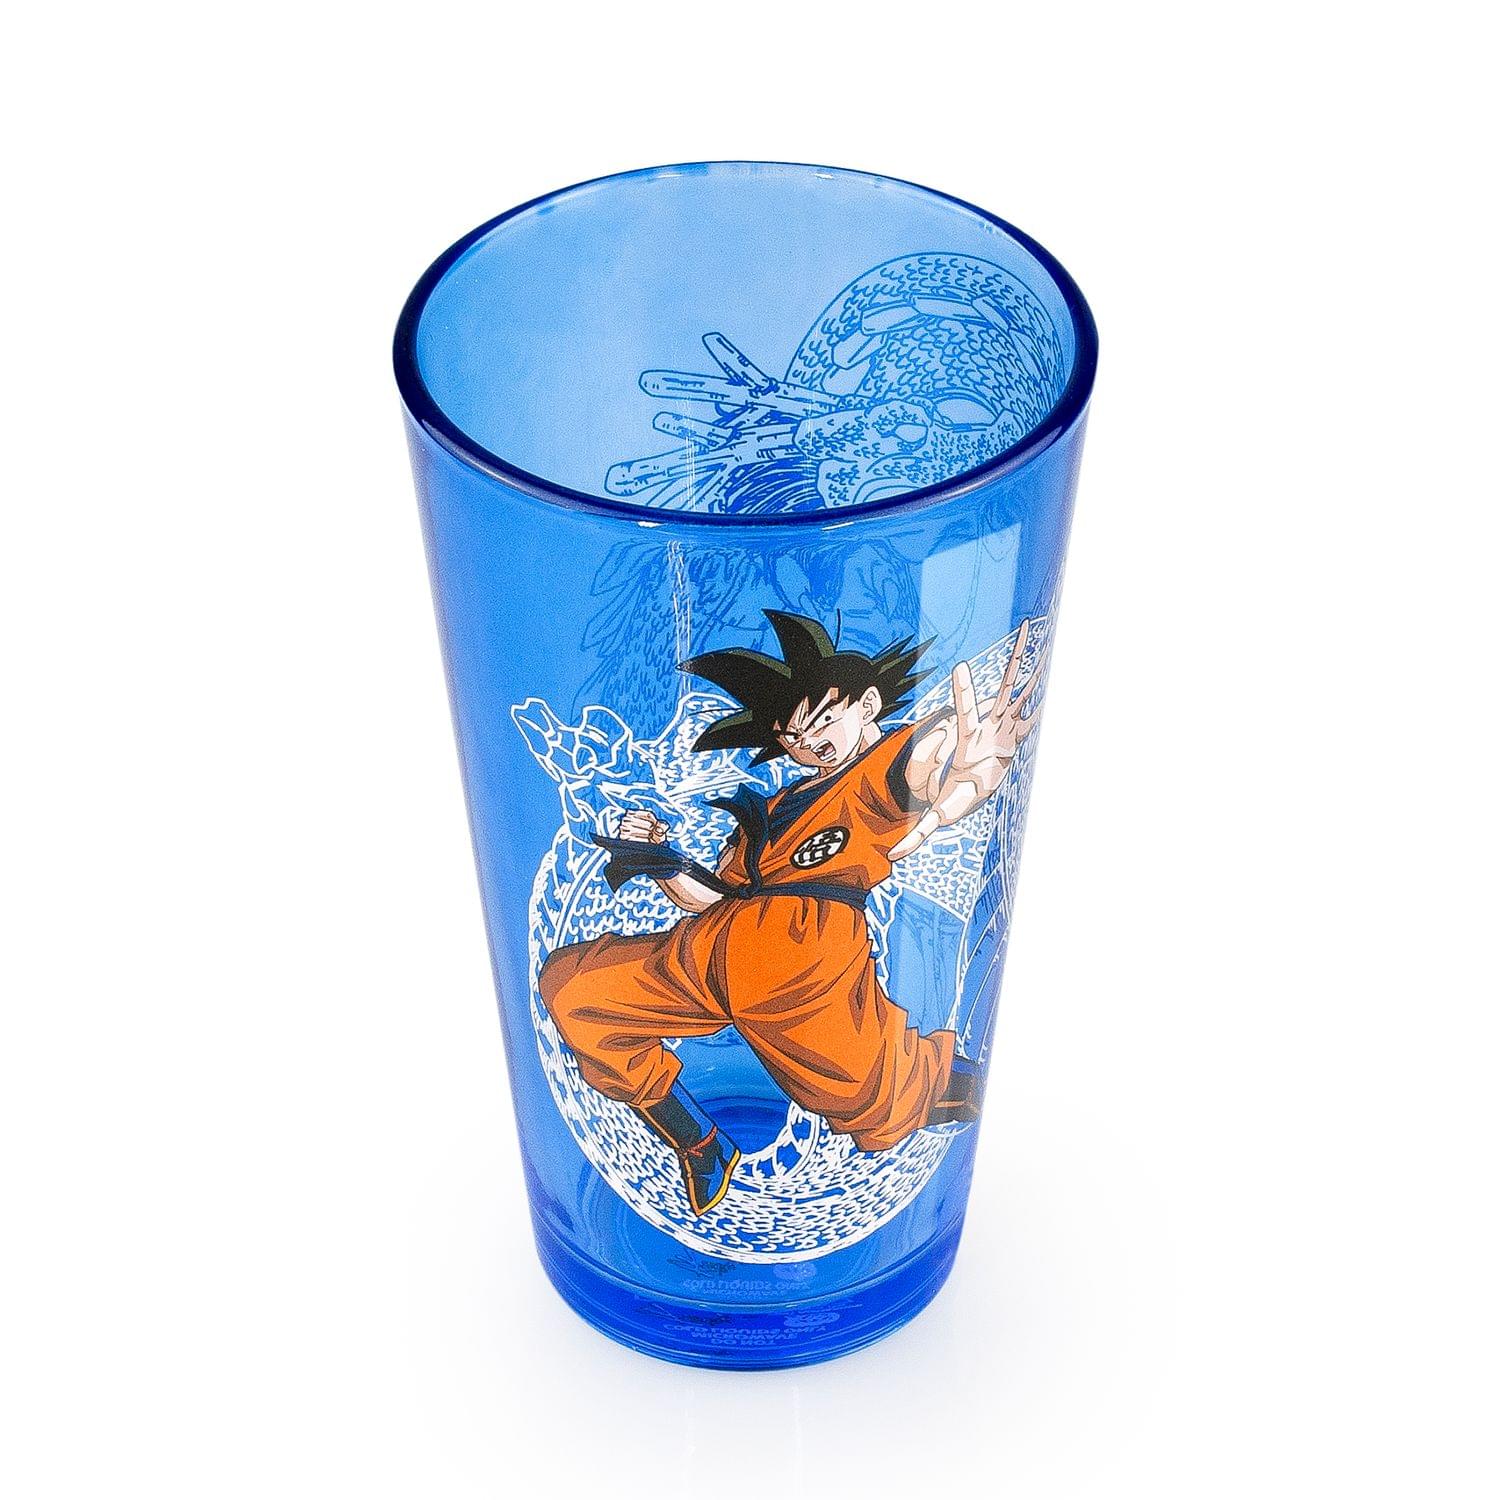 Dragon Ball Z Red Goku Large Drinking Cup Glass in box